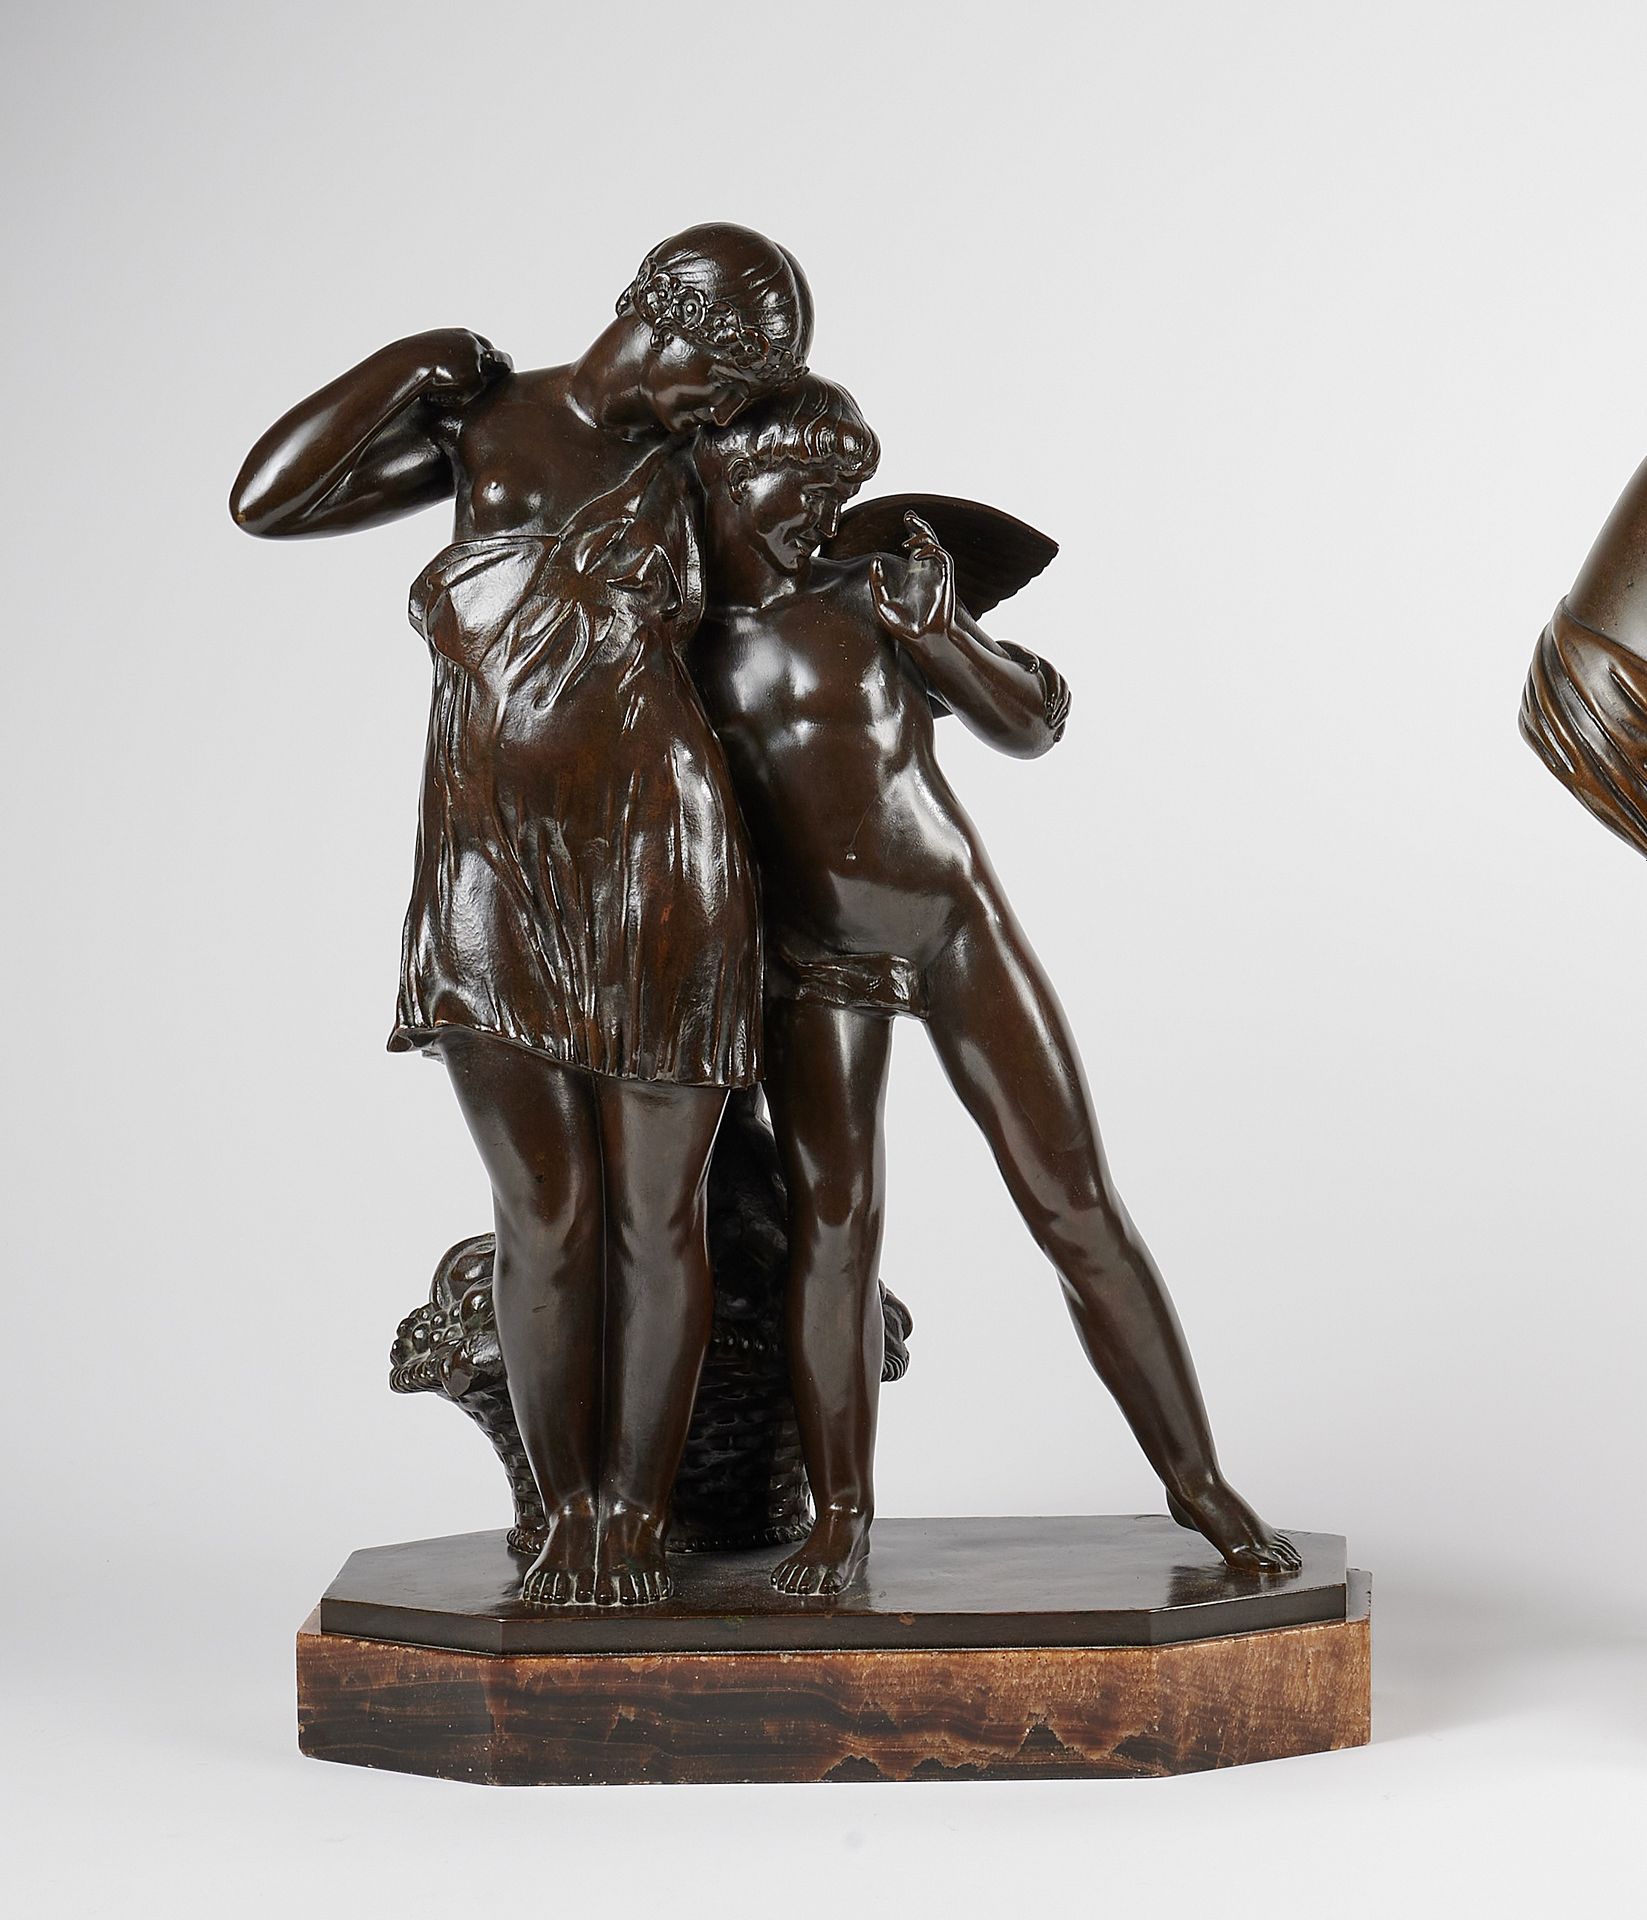 Null Lucienne Heuvelmans (1881-1944)
Youth and Love 
Bronze group with red-tinte&hellip;